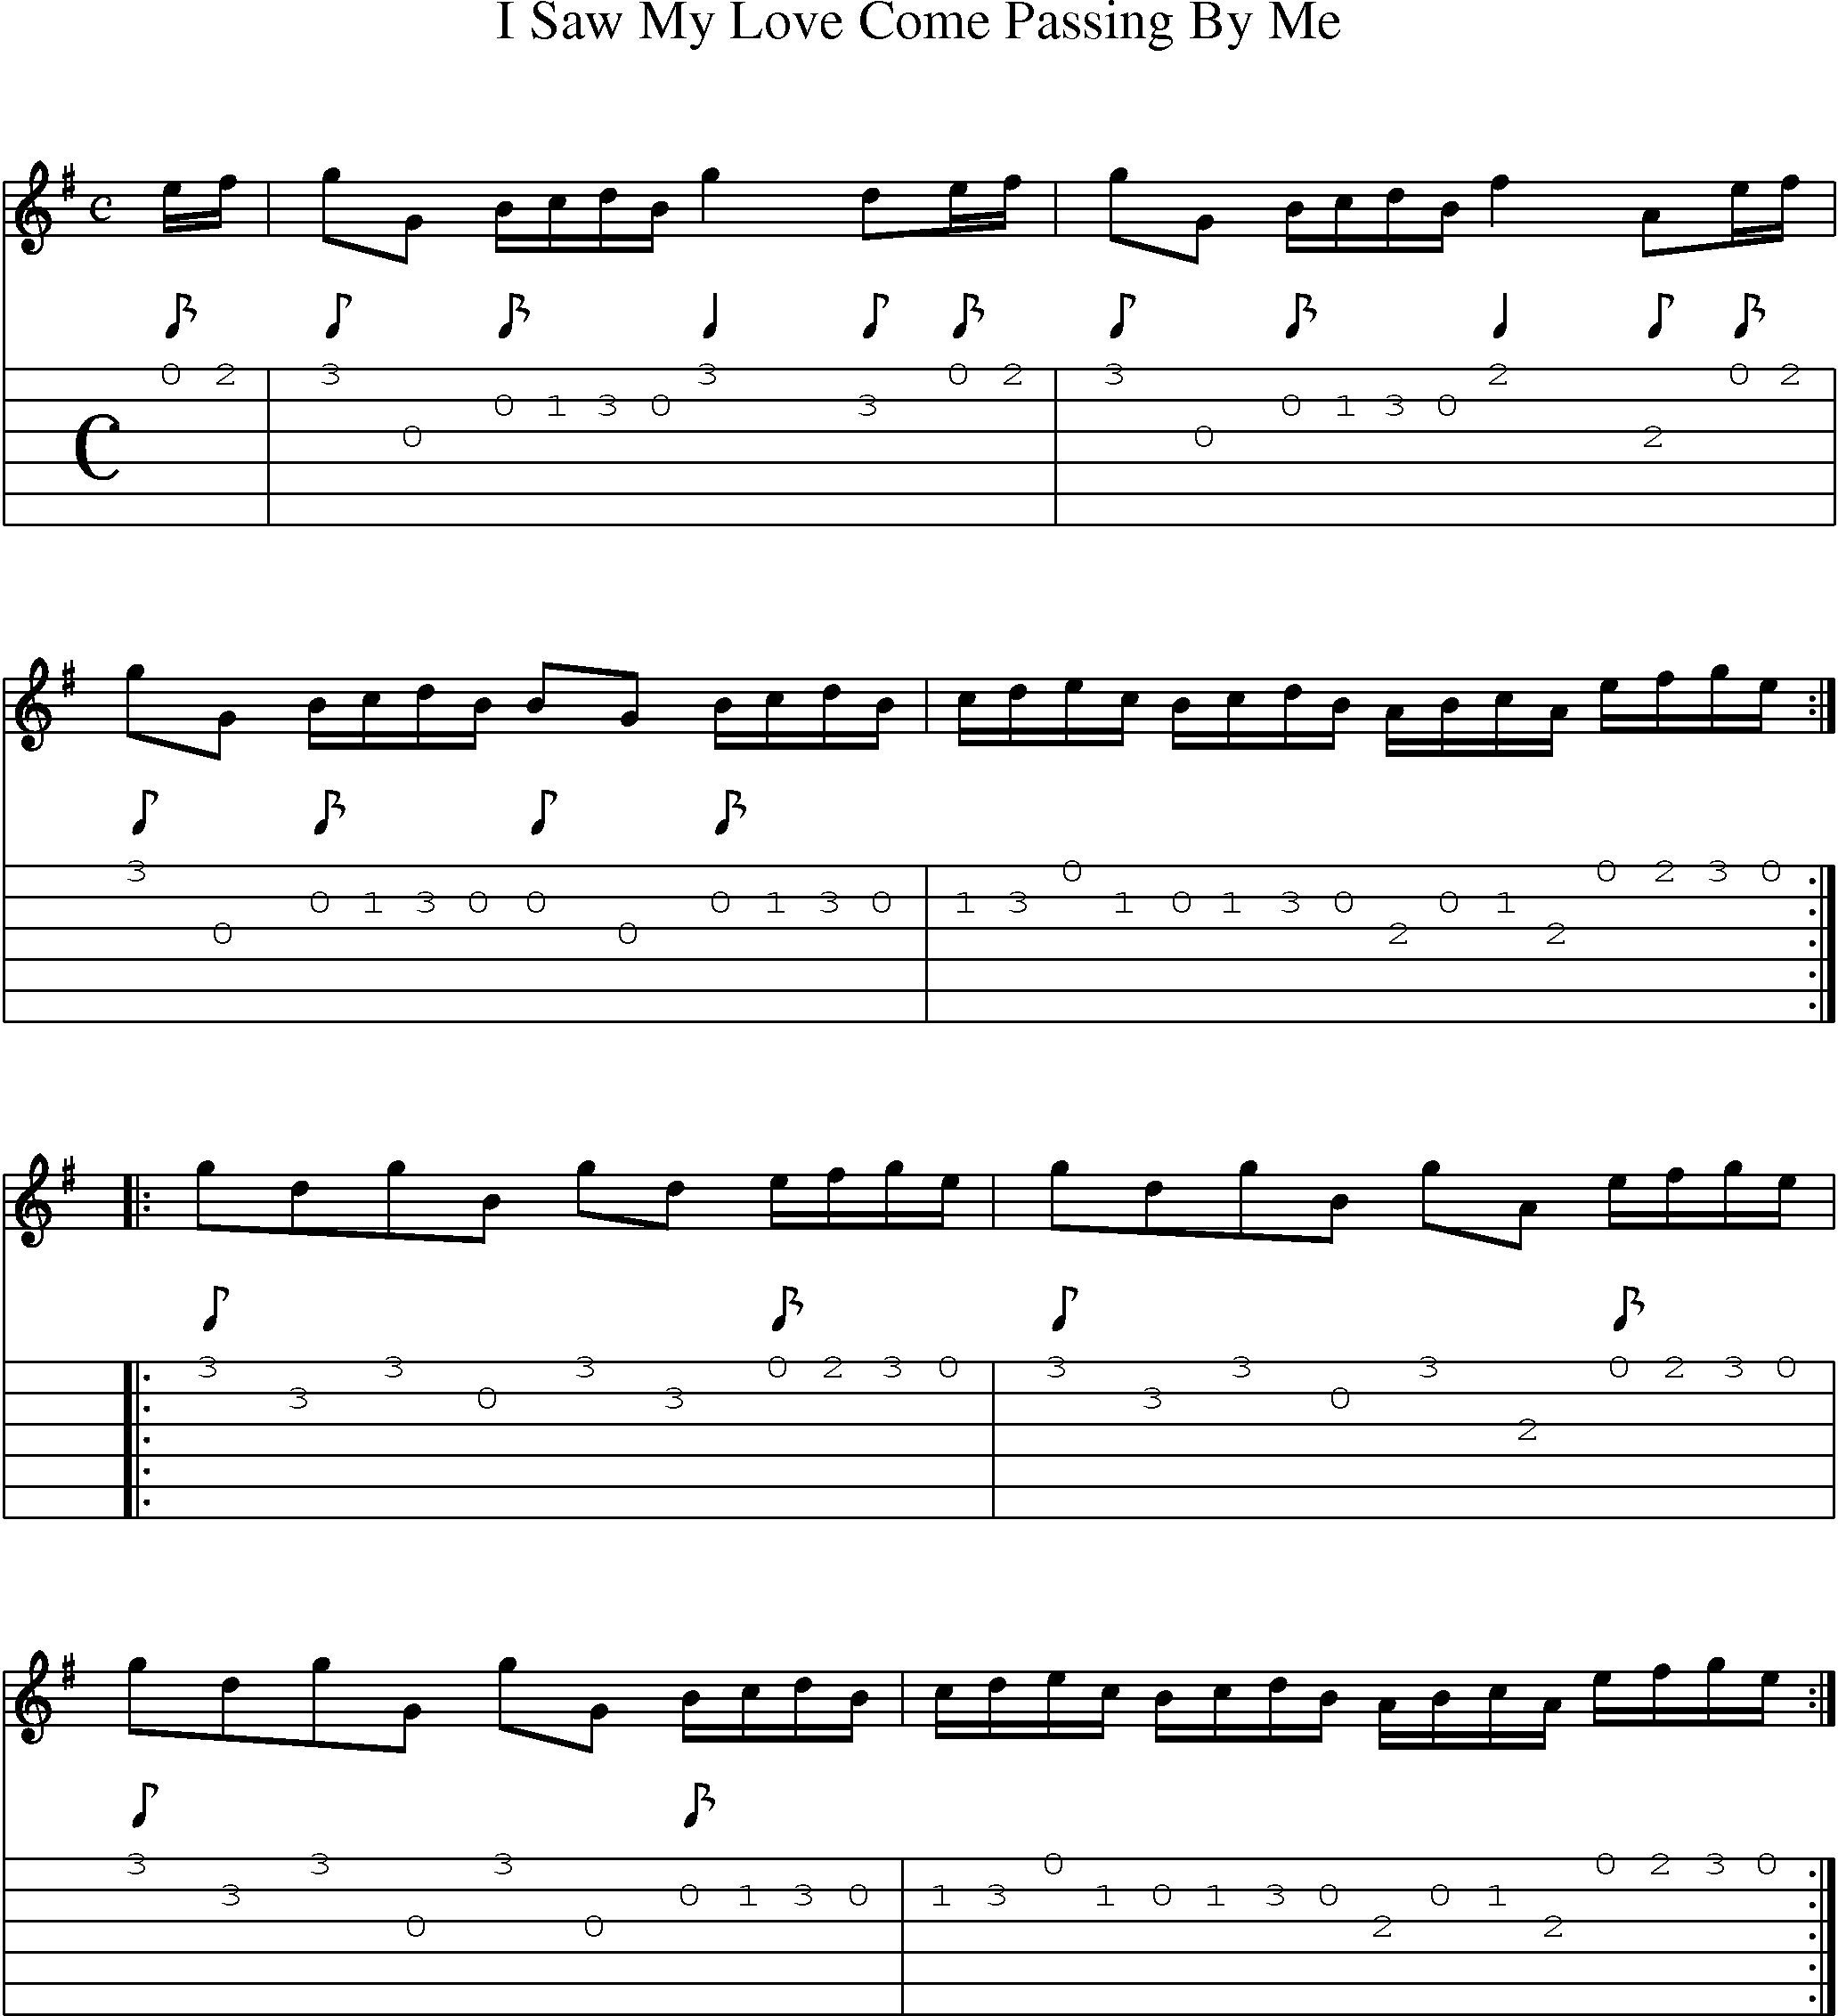 Music Score and Guitar Tabs for I Saw My Love Come Passing By Me